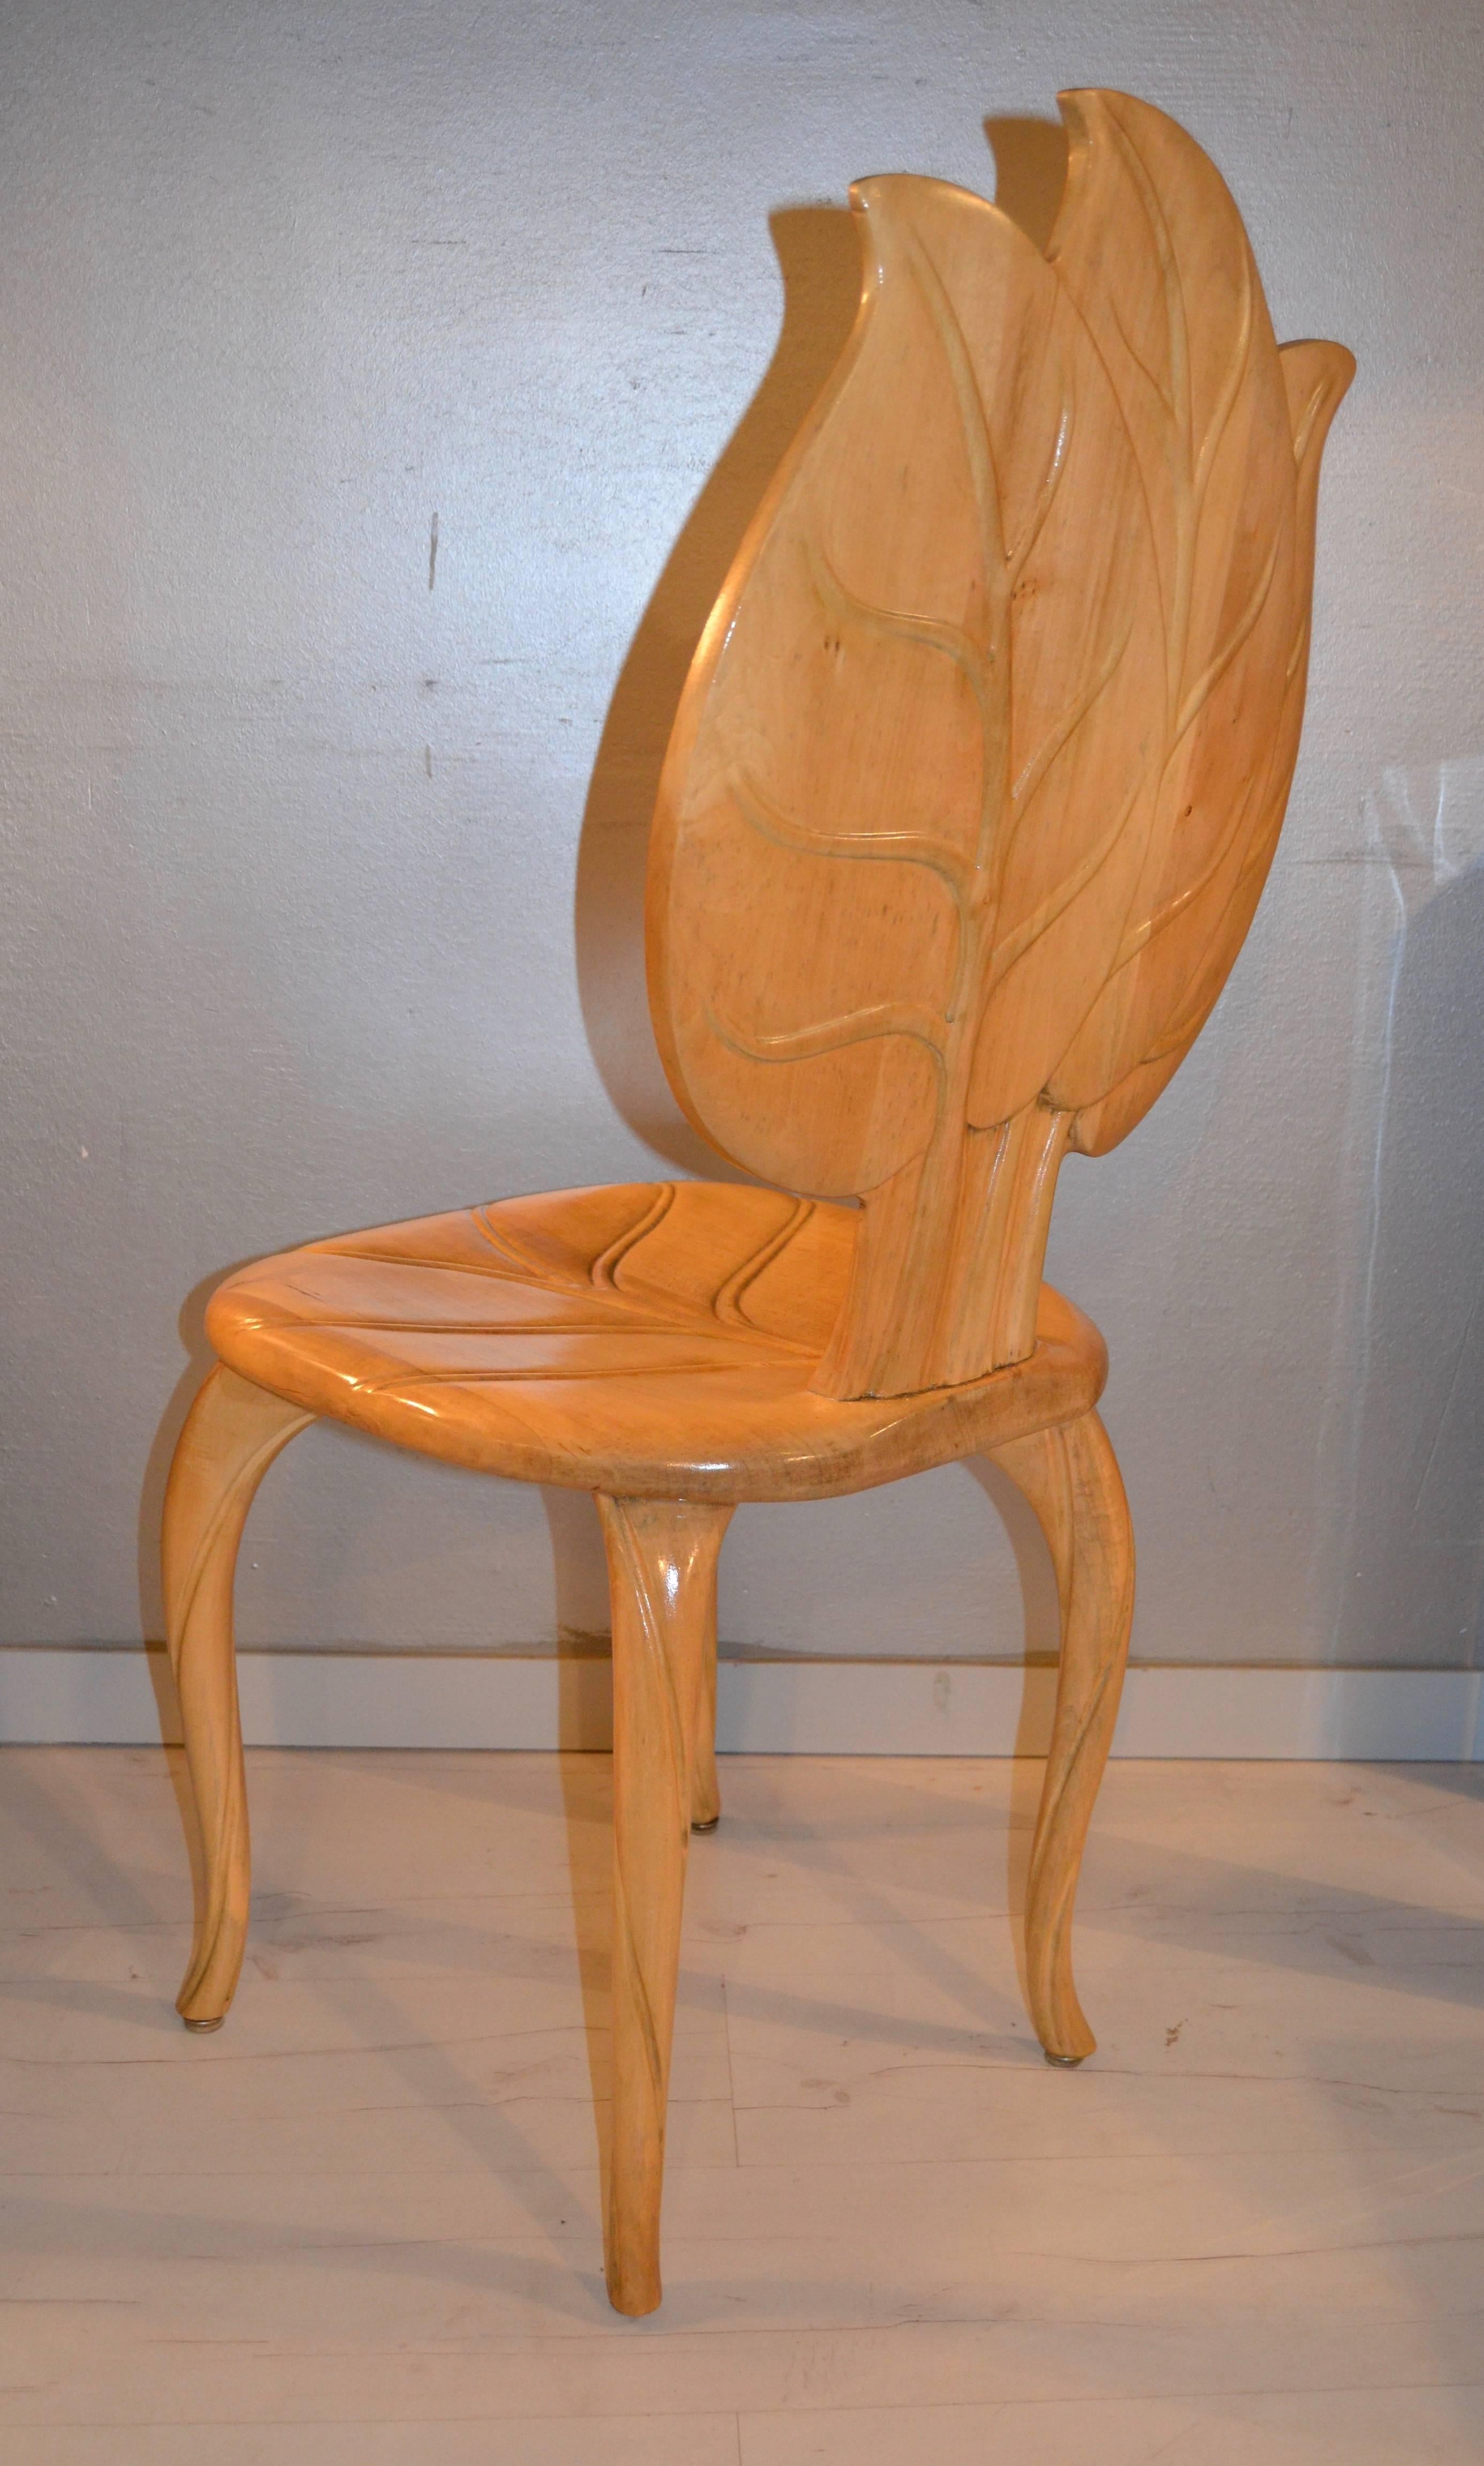 leaf chair for sale